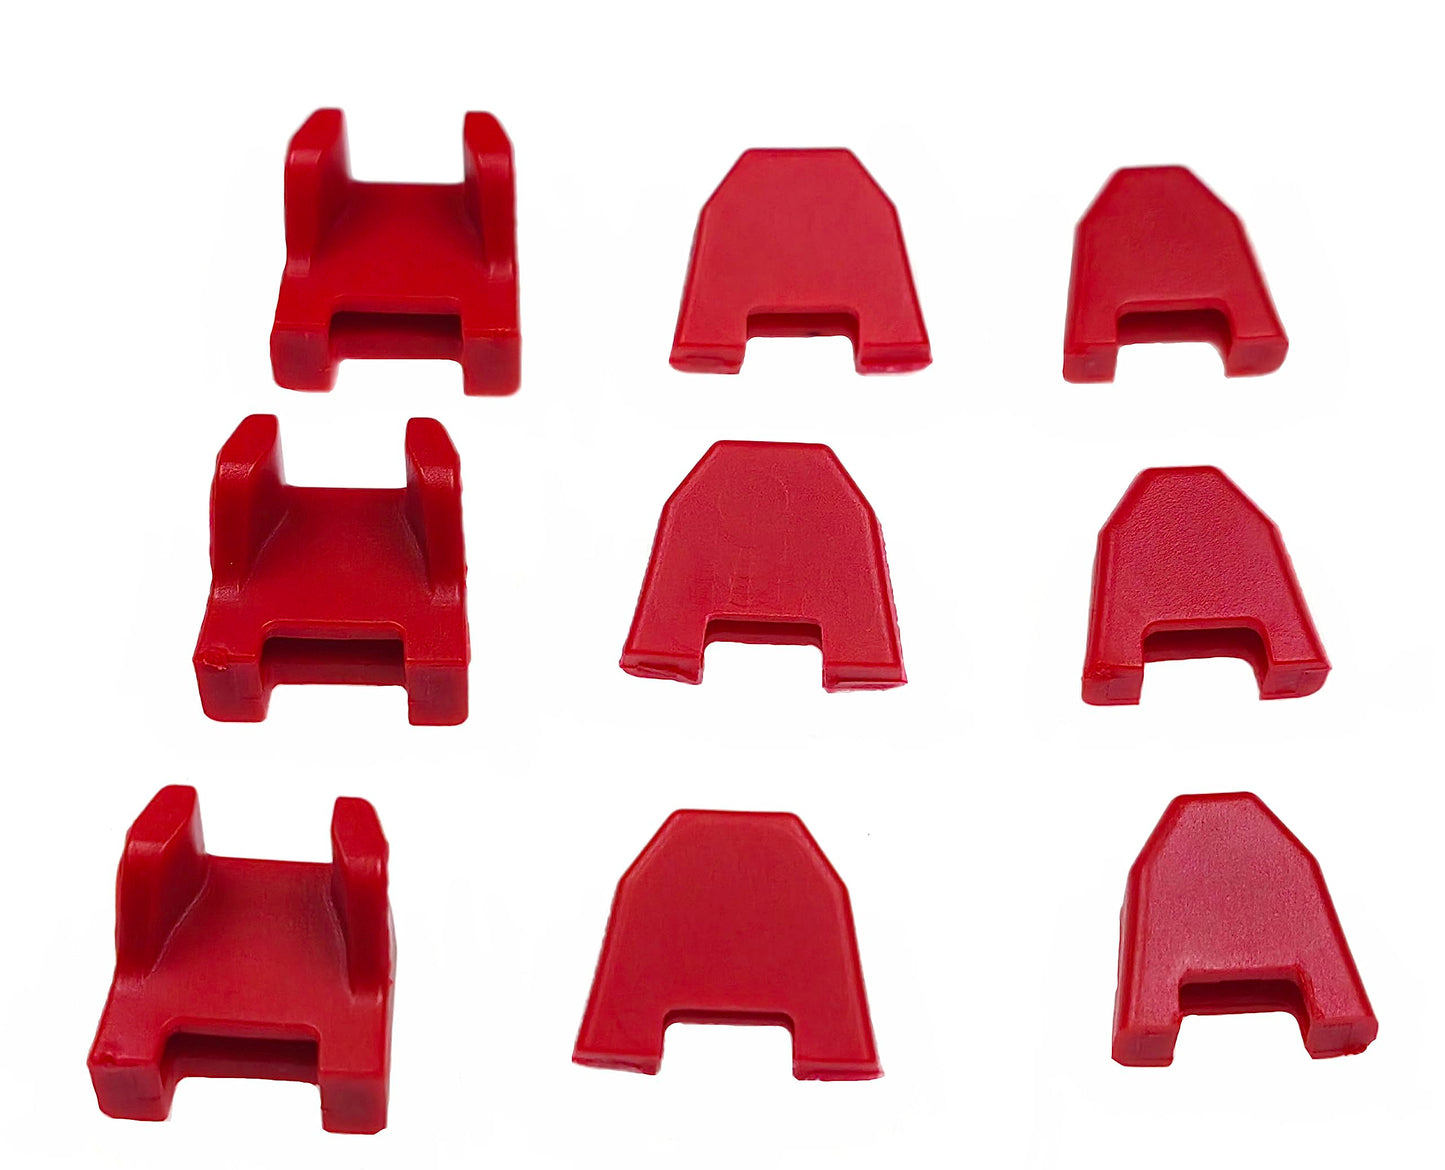 (Set of 9) Nose cushion no mar tip Replacement Milwaukee 42-38-0017 (2746-00) nailer,No-Mar Pad Kit For M18 battery nailers/staplers